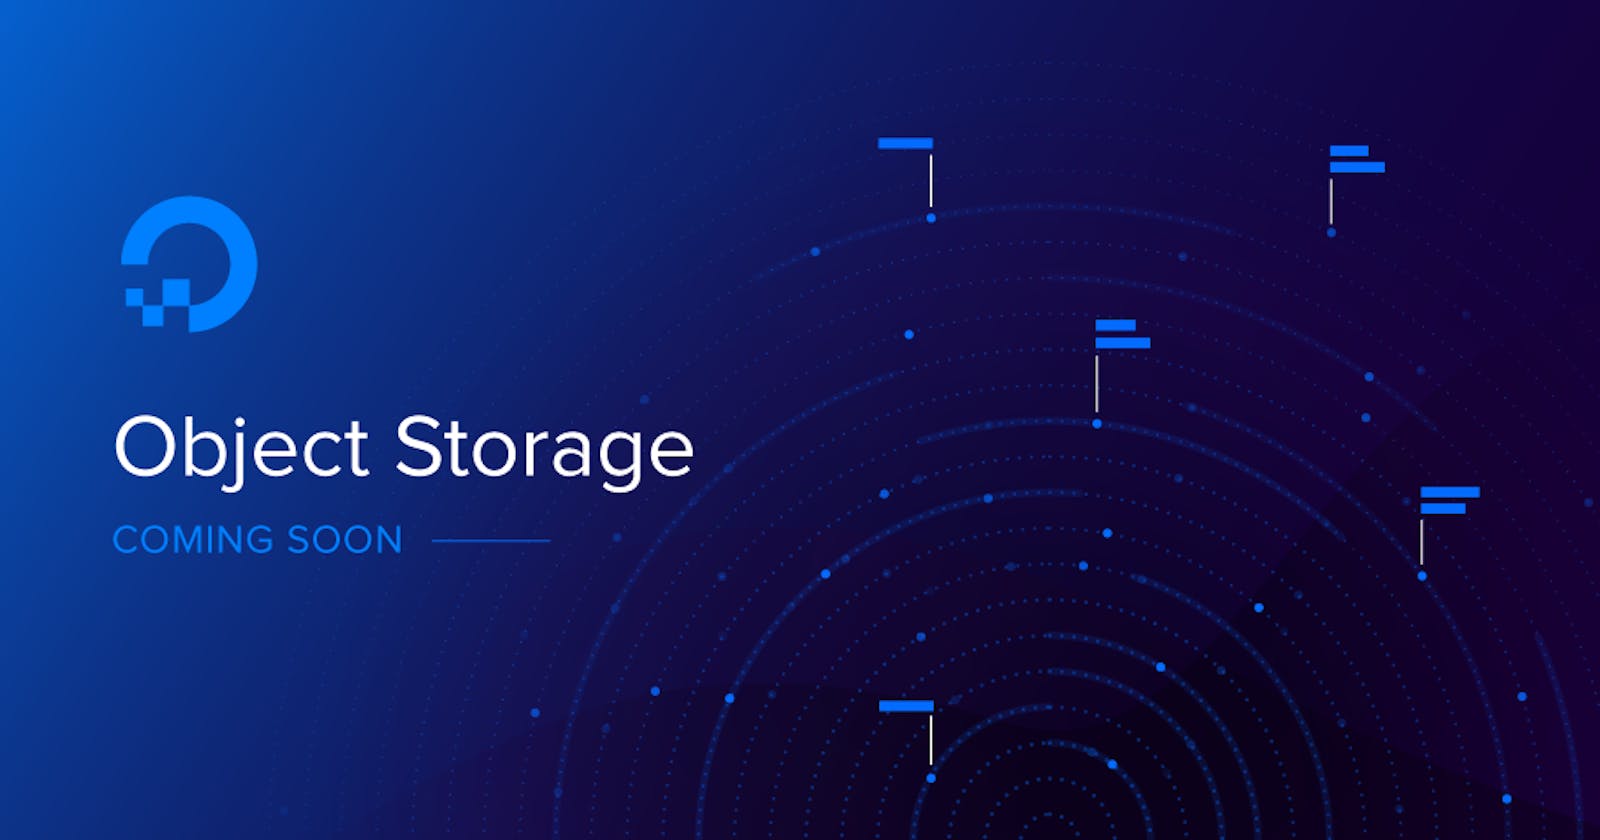 Introducing Object Storage | DigitalOcean. Request Early Access